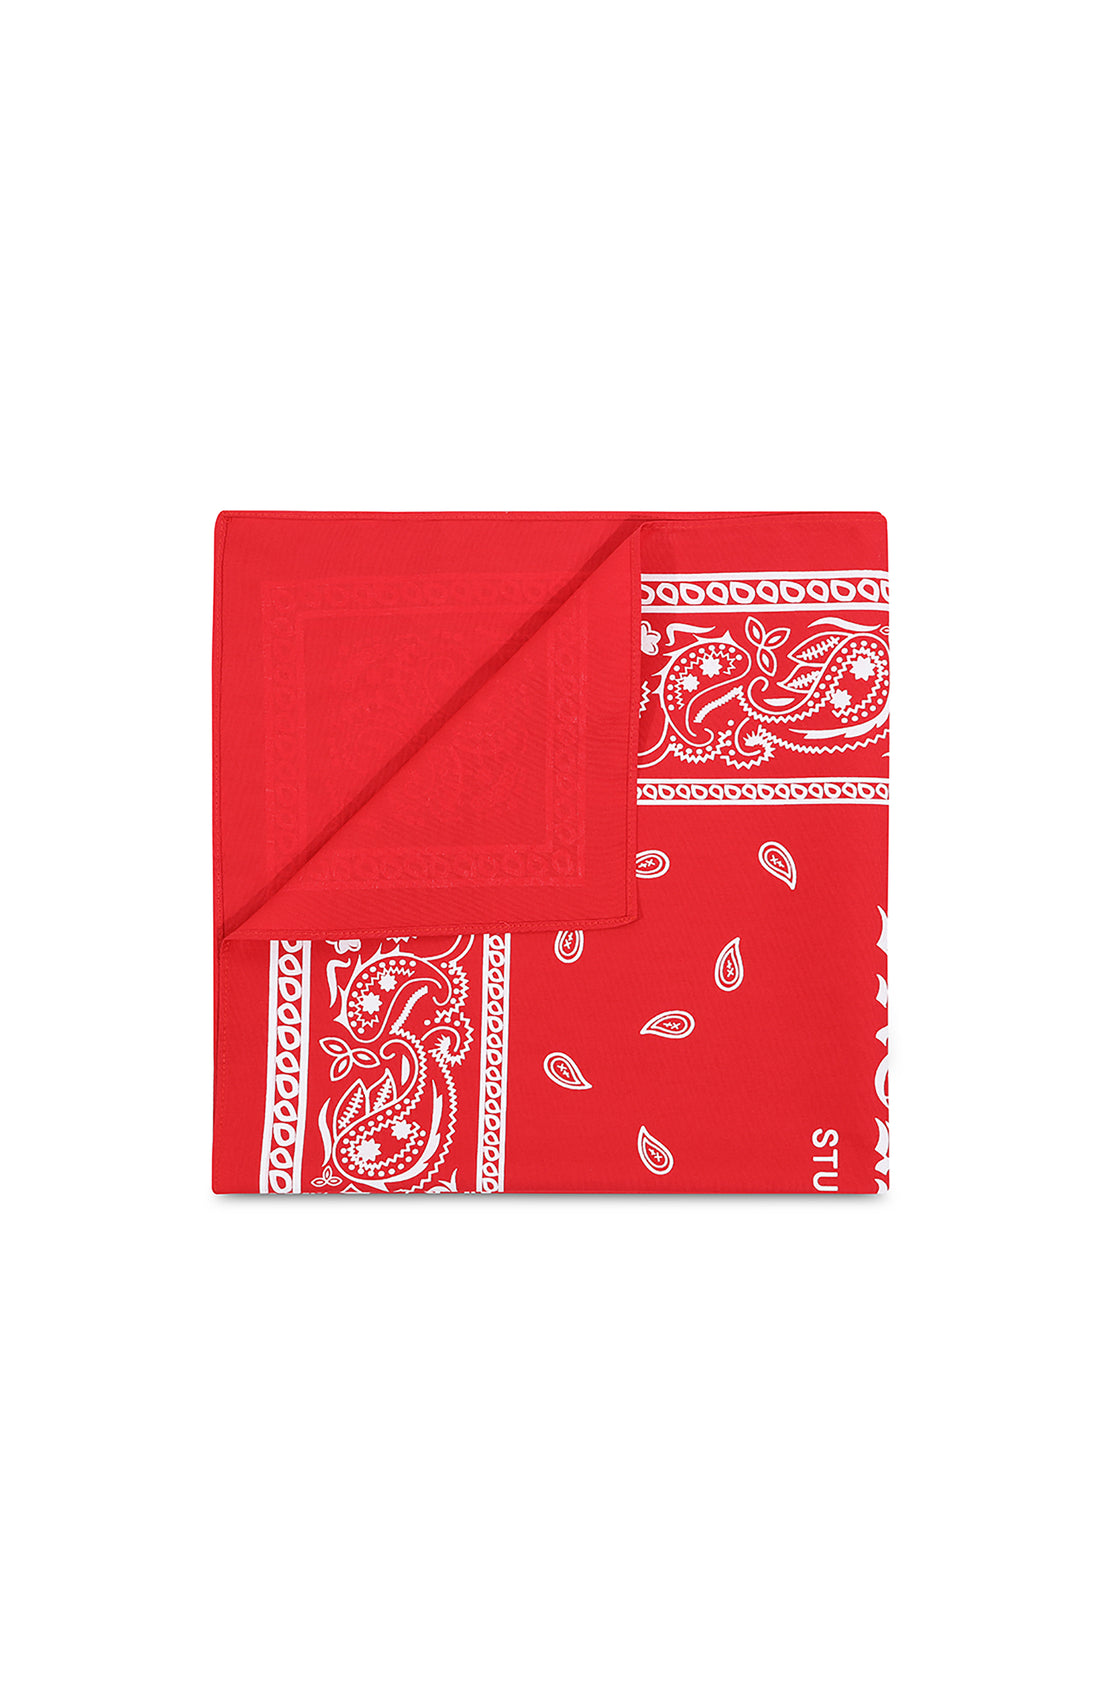 Add a touch of style and edge to your wardrobe with our premium bandana featuring a bold white graphic print. Measuring 55x55cm, this bandana is perfect for a variety of styling options. Expertly crafted in Portugal with a focus on quality and durability, it is easy to maintain with machine washing and hanging to dry for best results. Make a statement with this unique and eye-catching accessory.